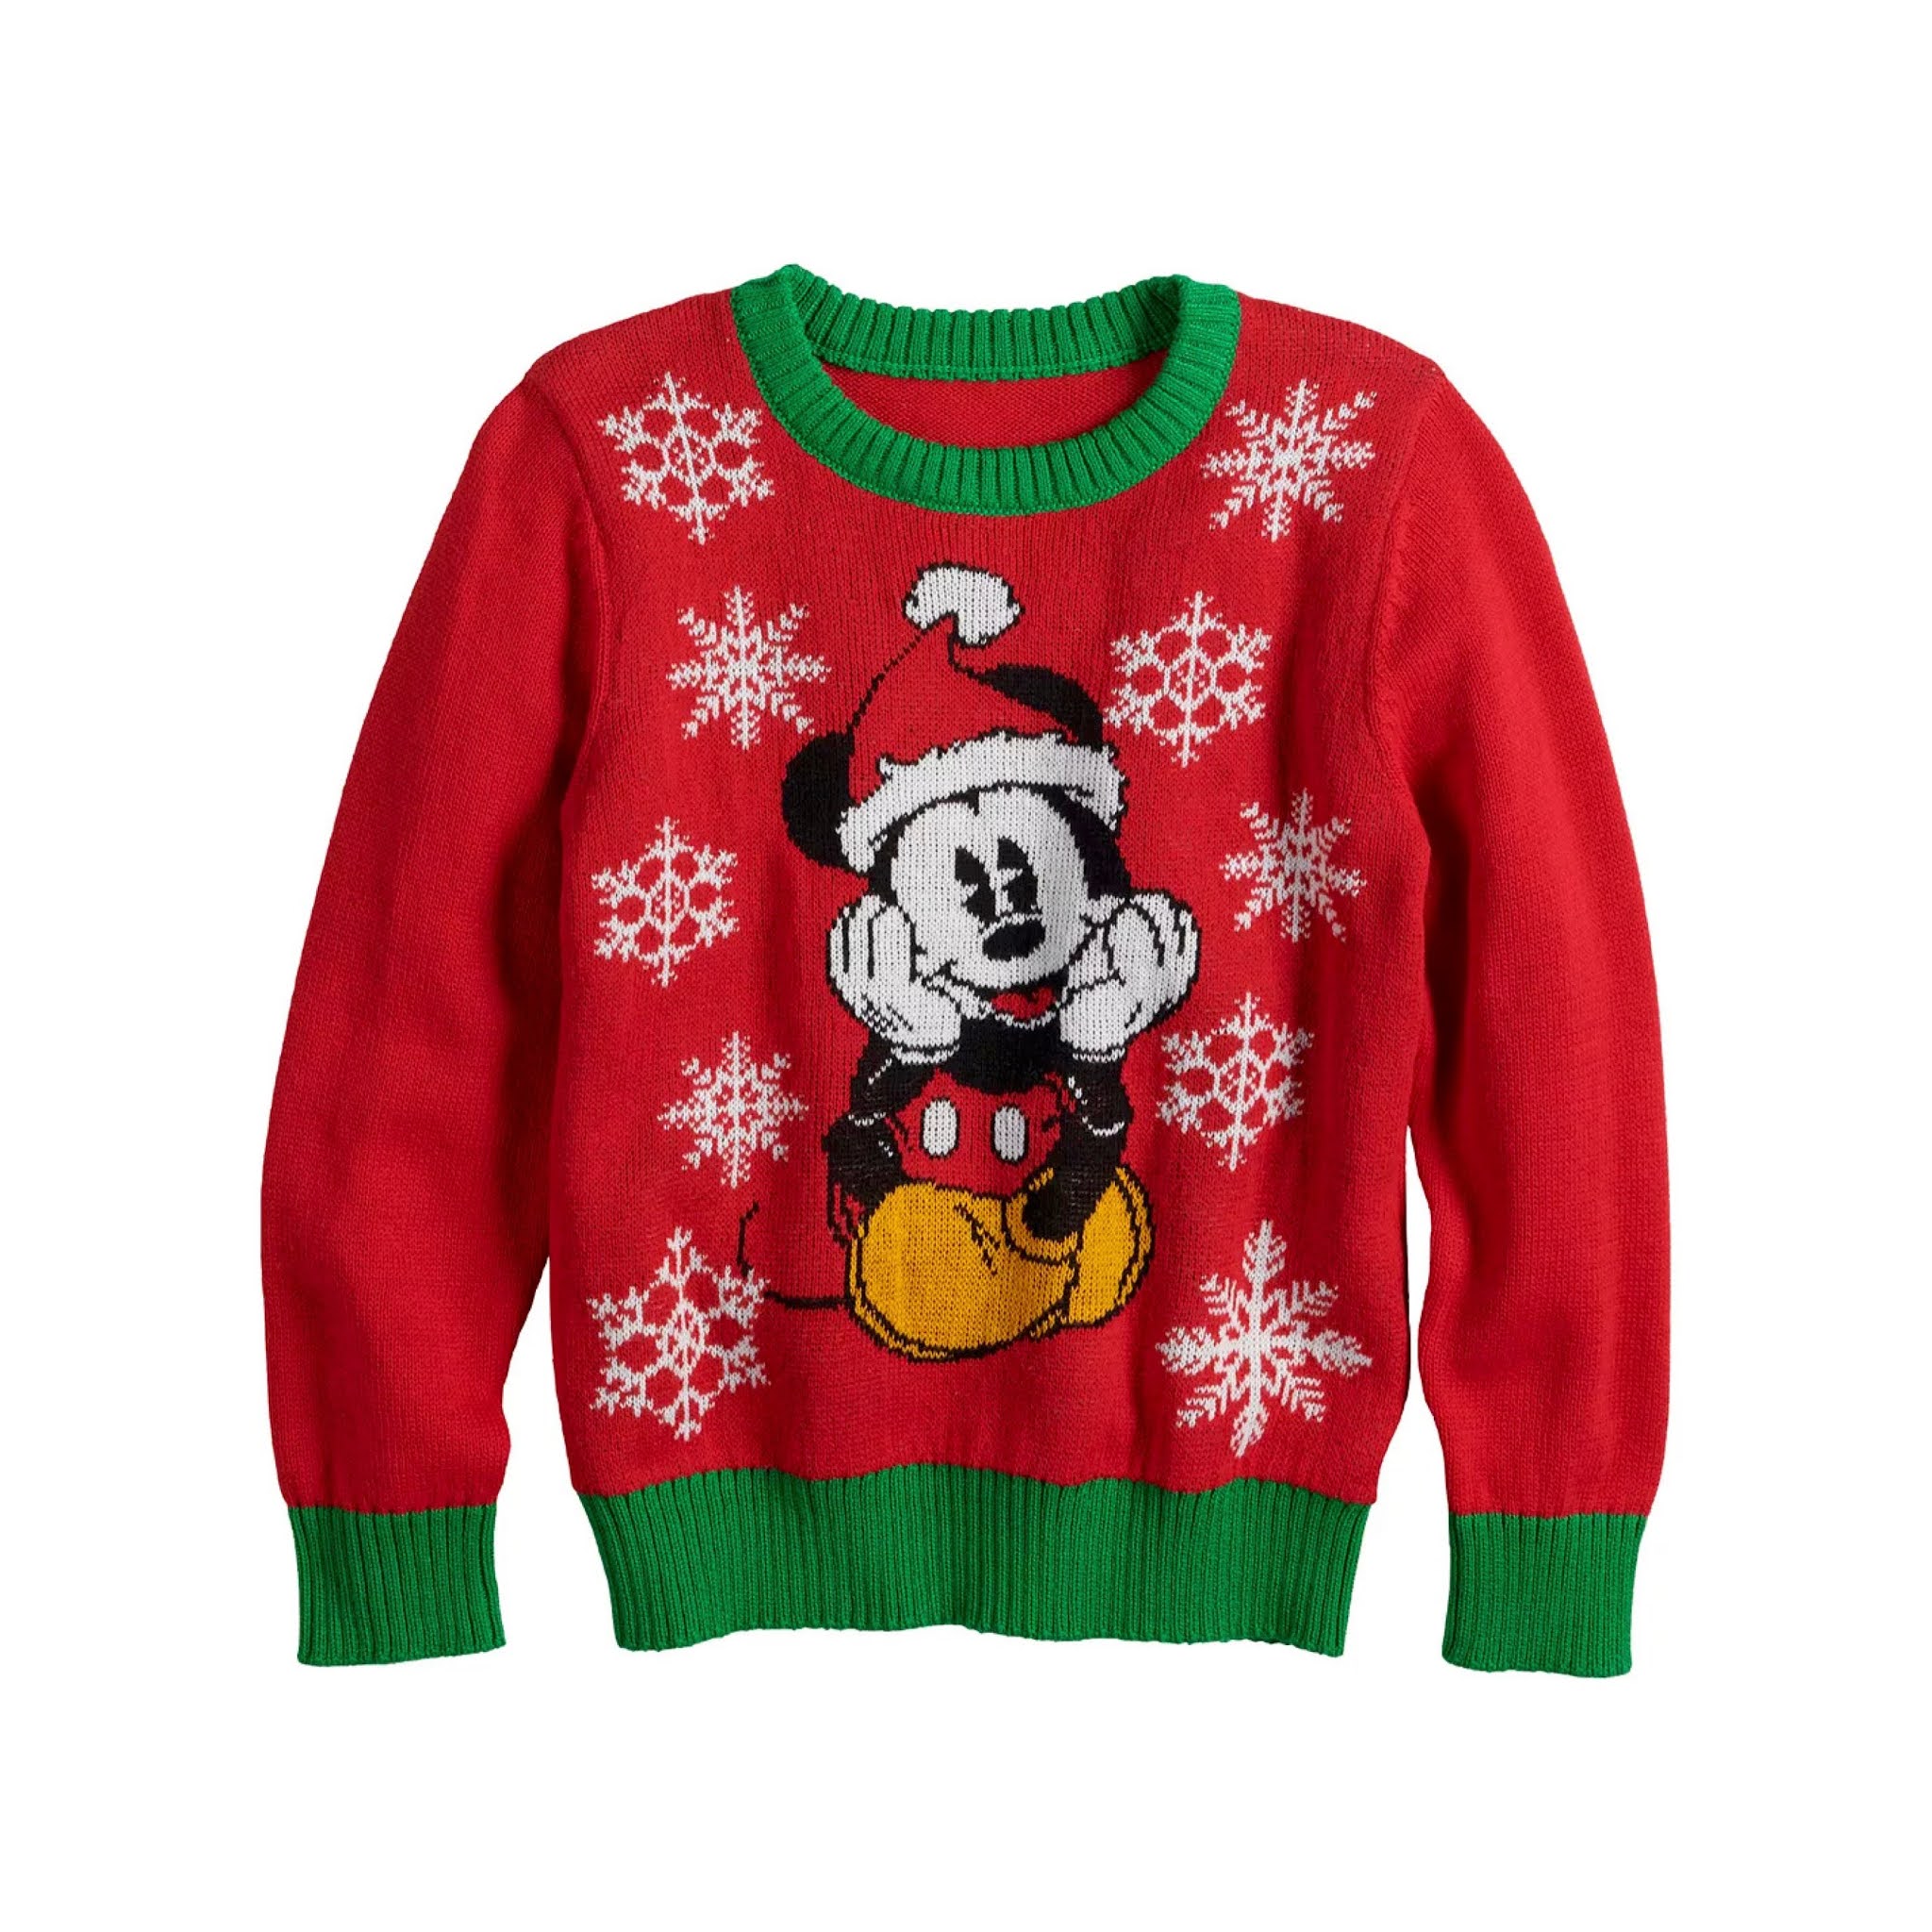 Mickey Mouse Knit Holiday Sweater from Jumping Beans